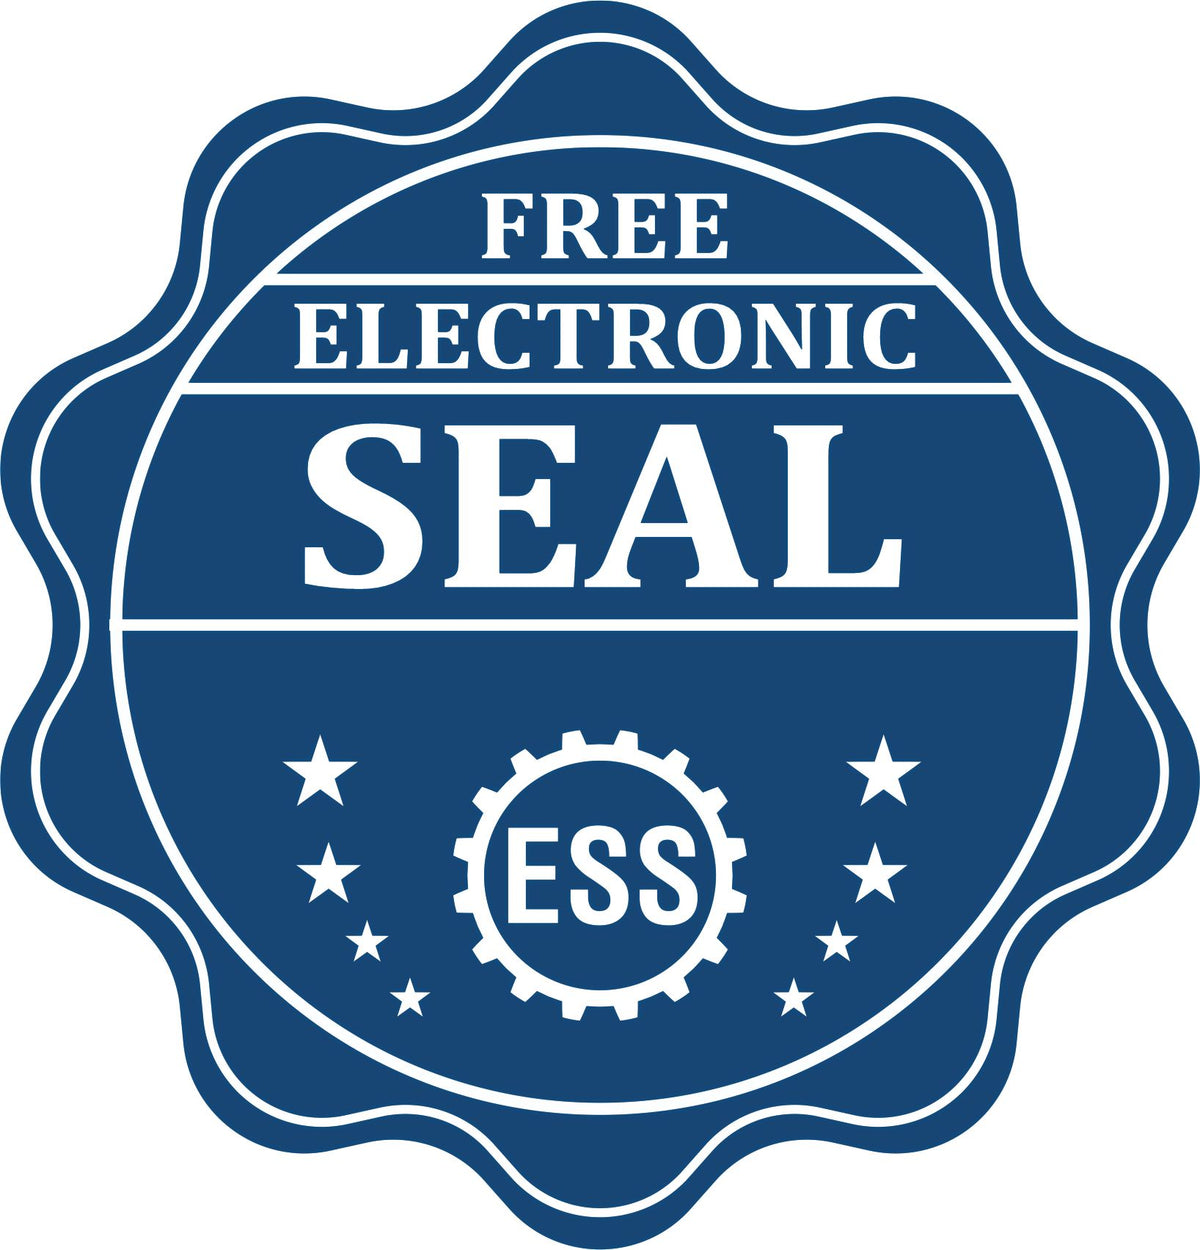 A badge showing a free electronic seal for the Gift Kentucky Engineer Seal with stars and the ESS gear on the emblem.